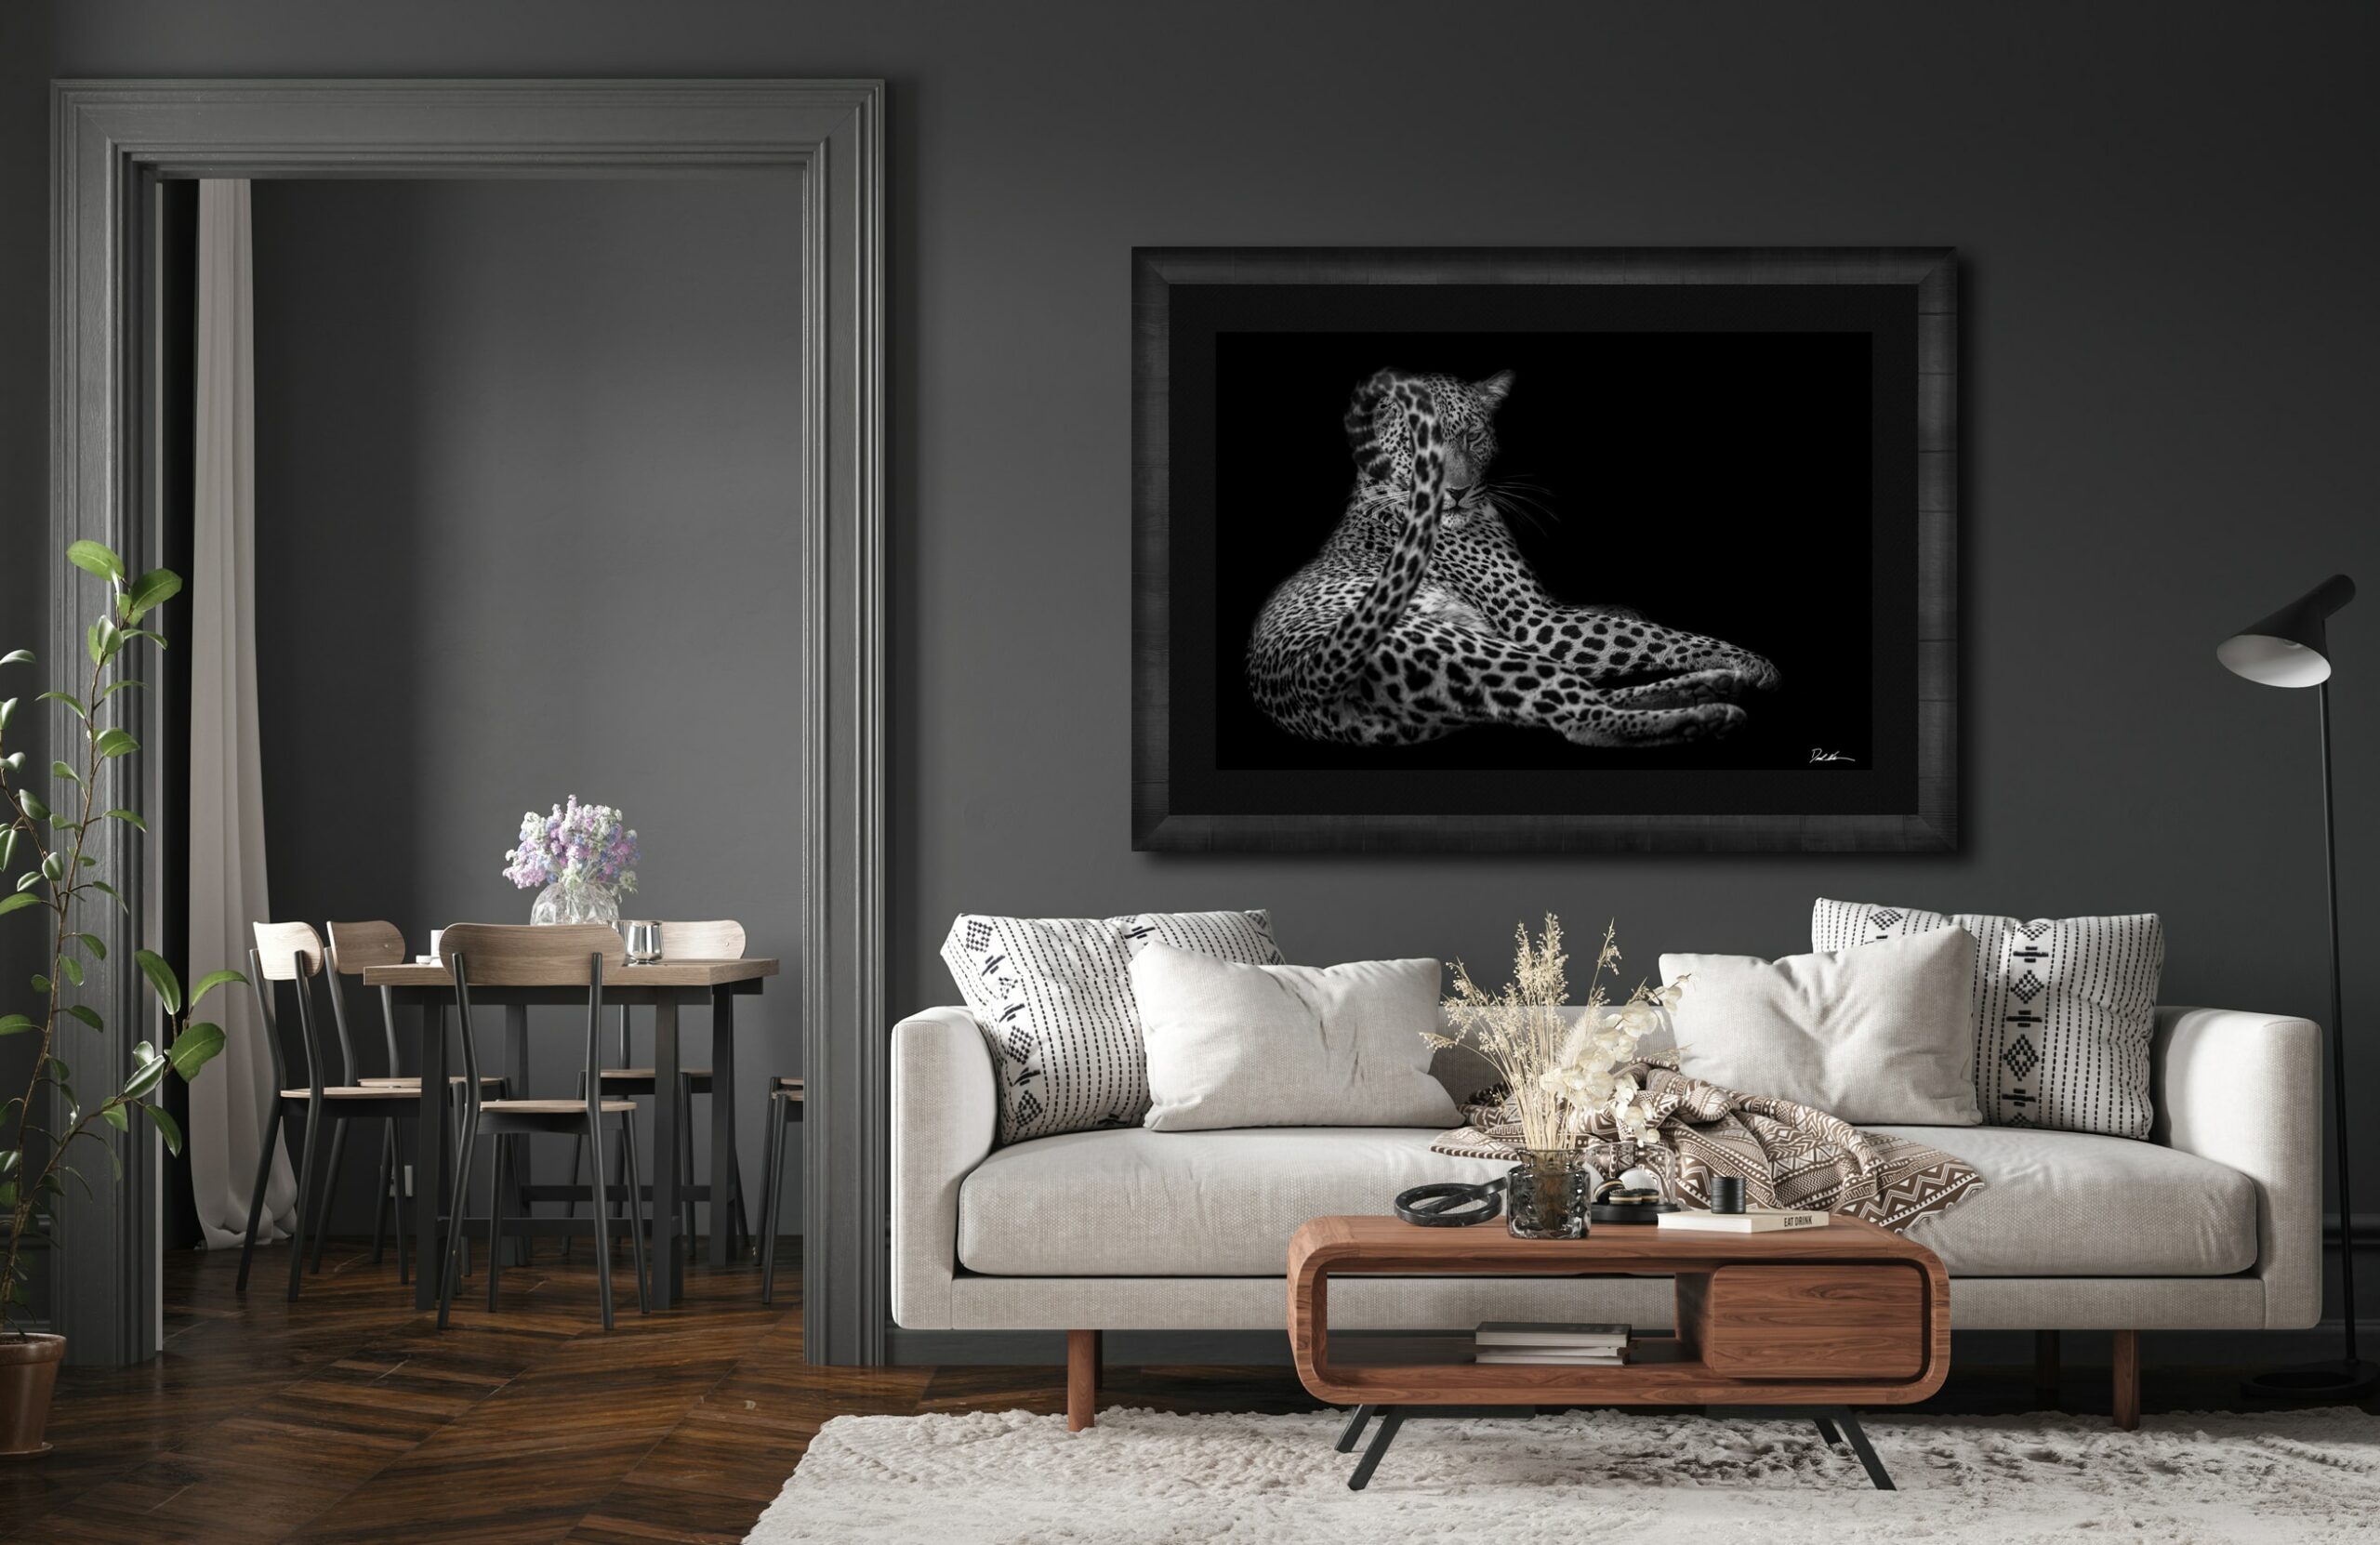 large framed fine art print of a leopard displayed above the couch in a modern luxury home